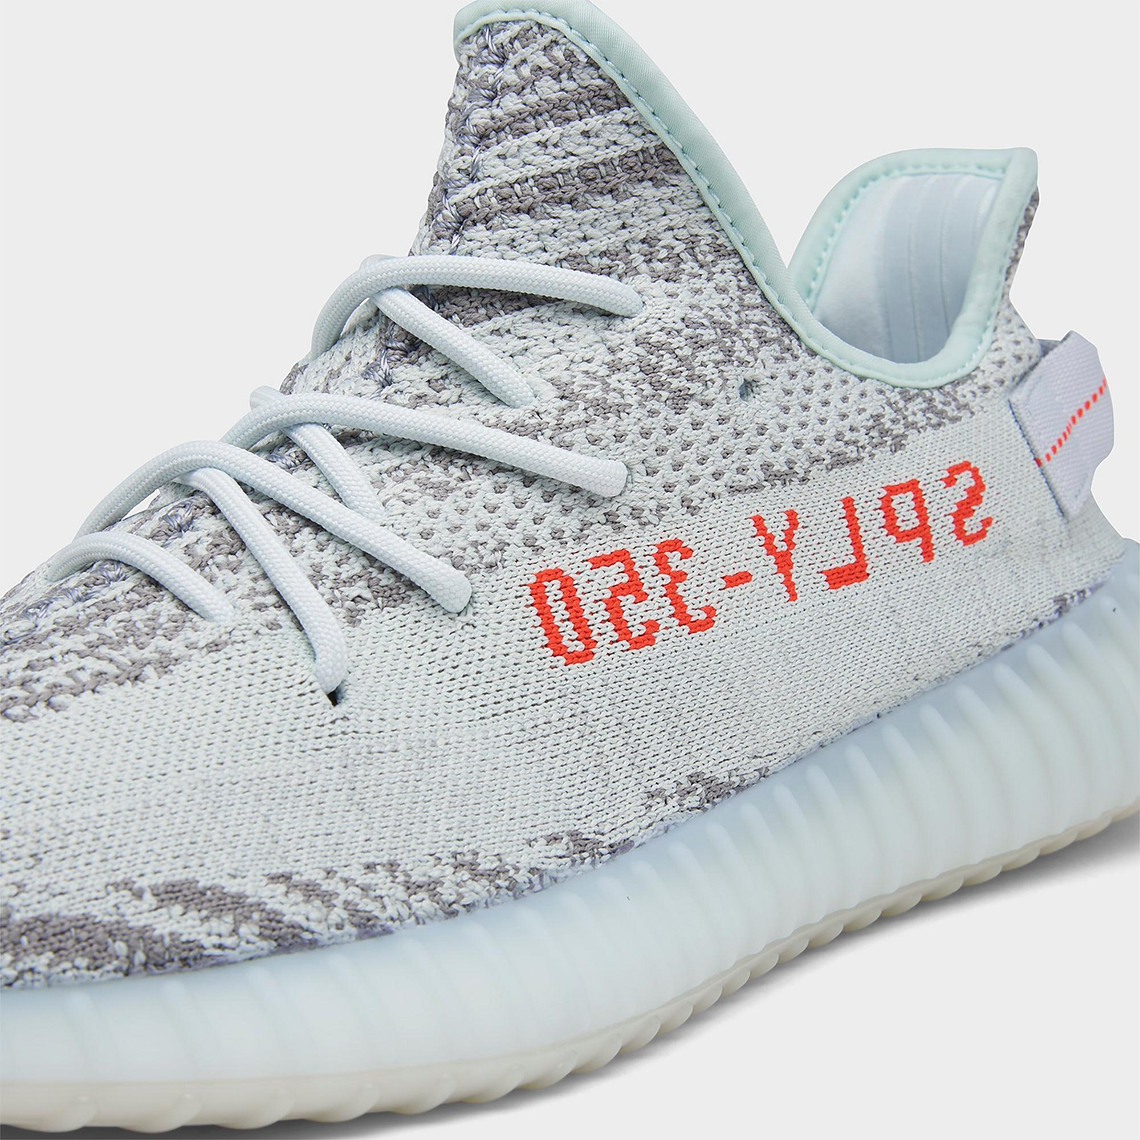 adidas Yeezy Boost 350 v2 Blue Tint B37571 Release Reminder